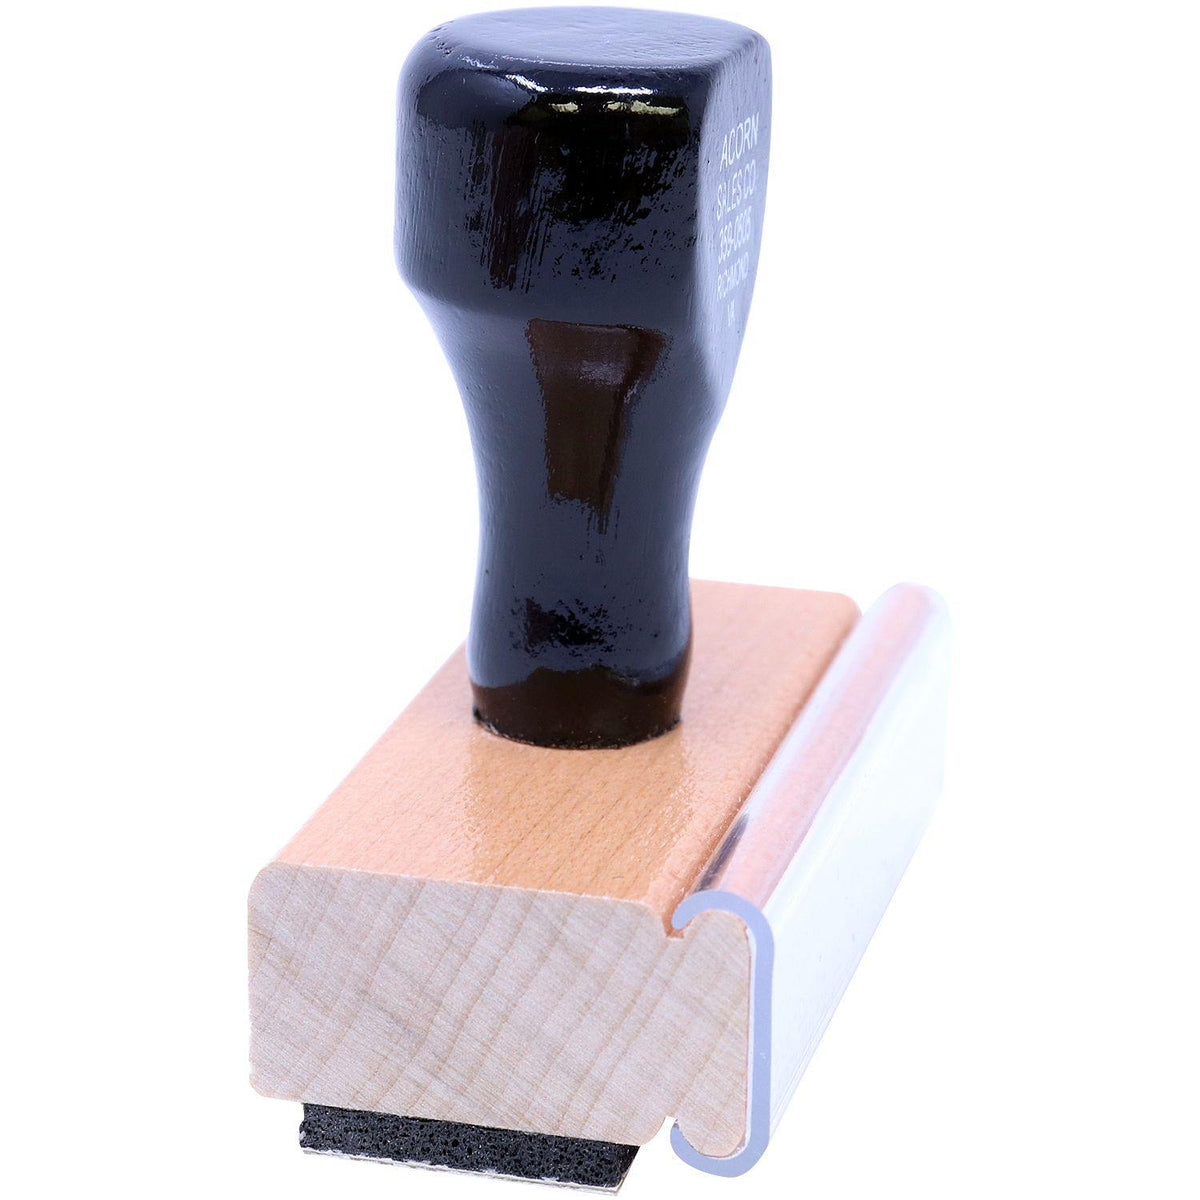 Side View of Chrono Rubber Stamp at an Angle